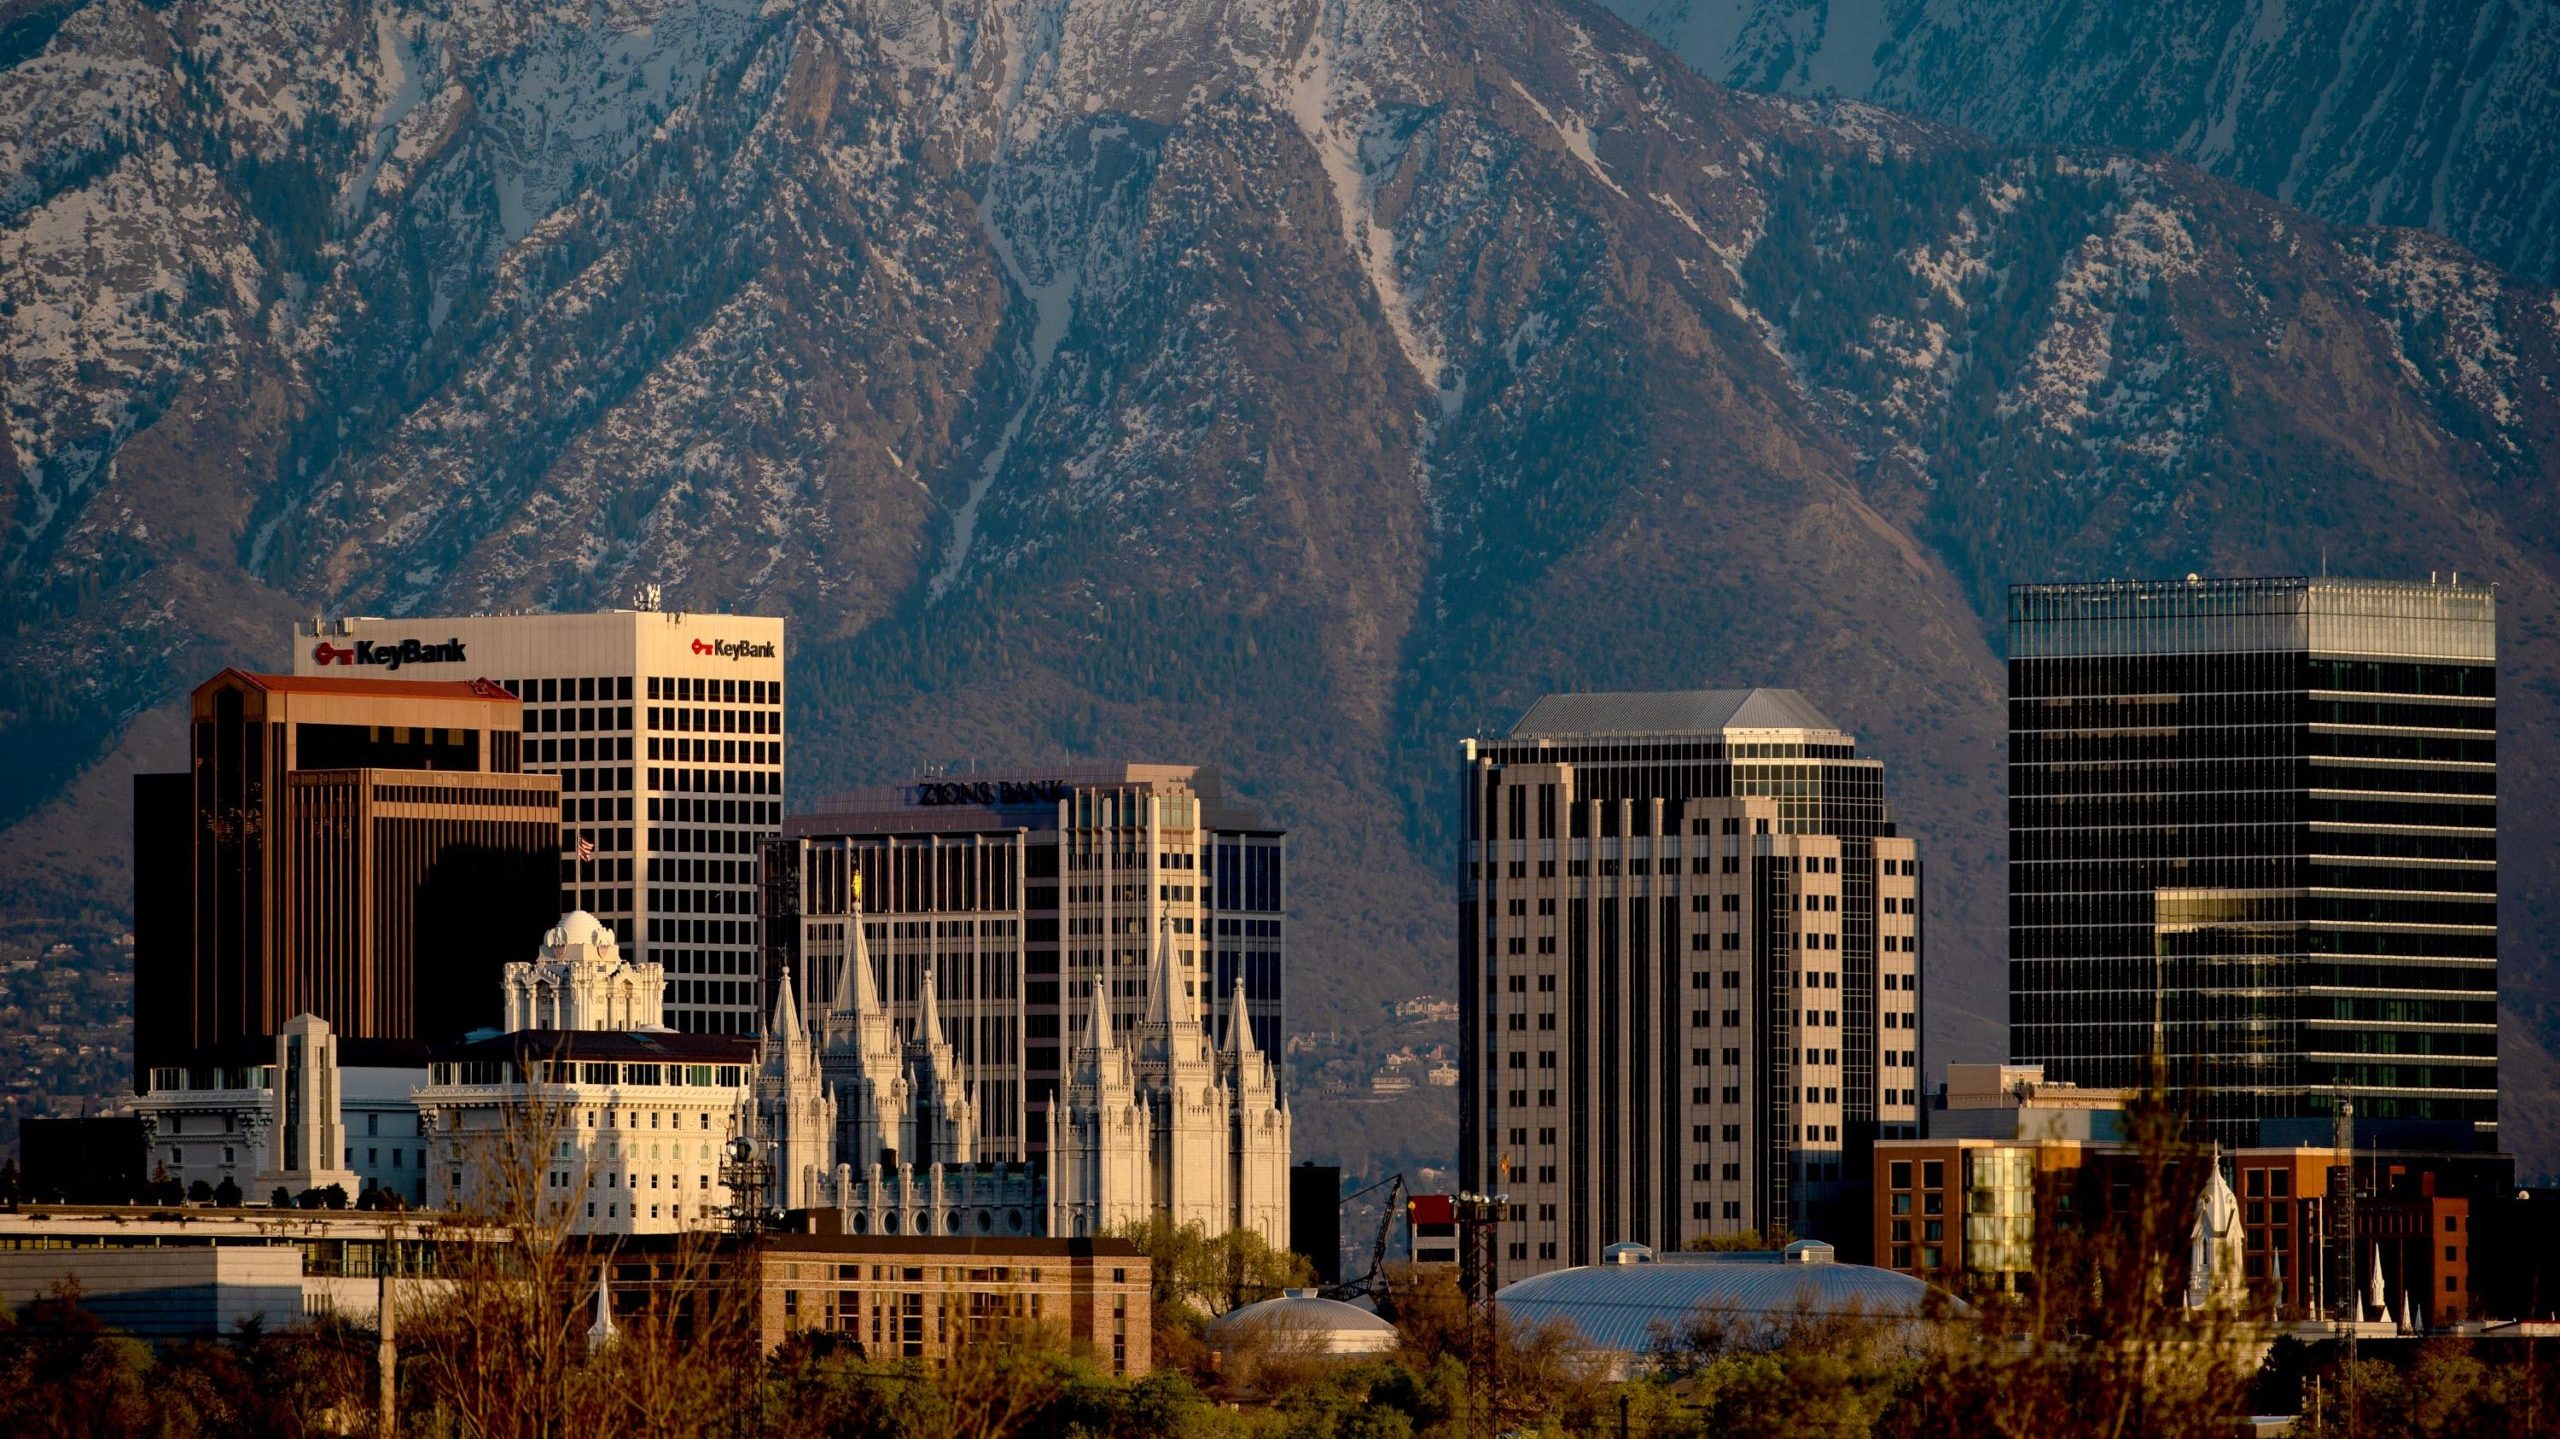 salt lake city skyline pictured, the city scored high in financial health...